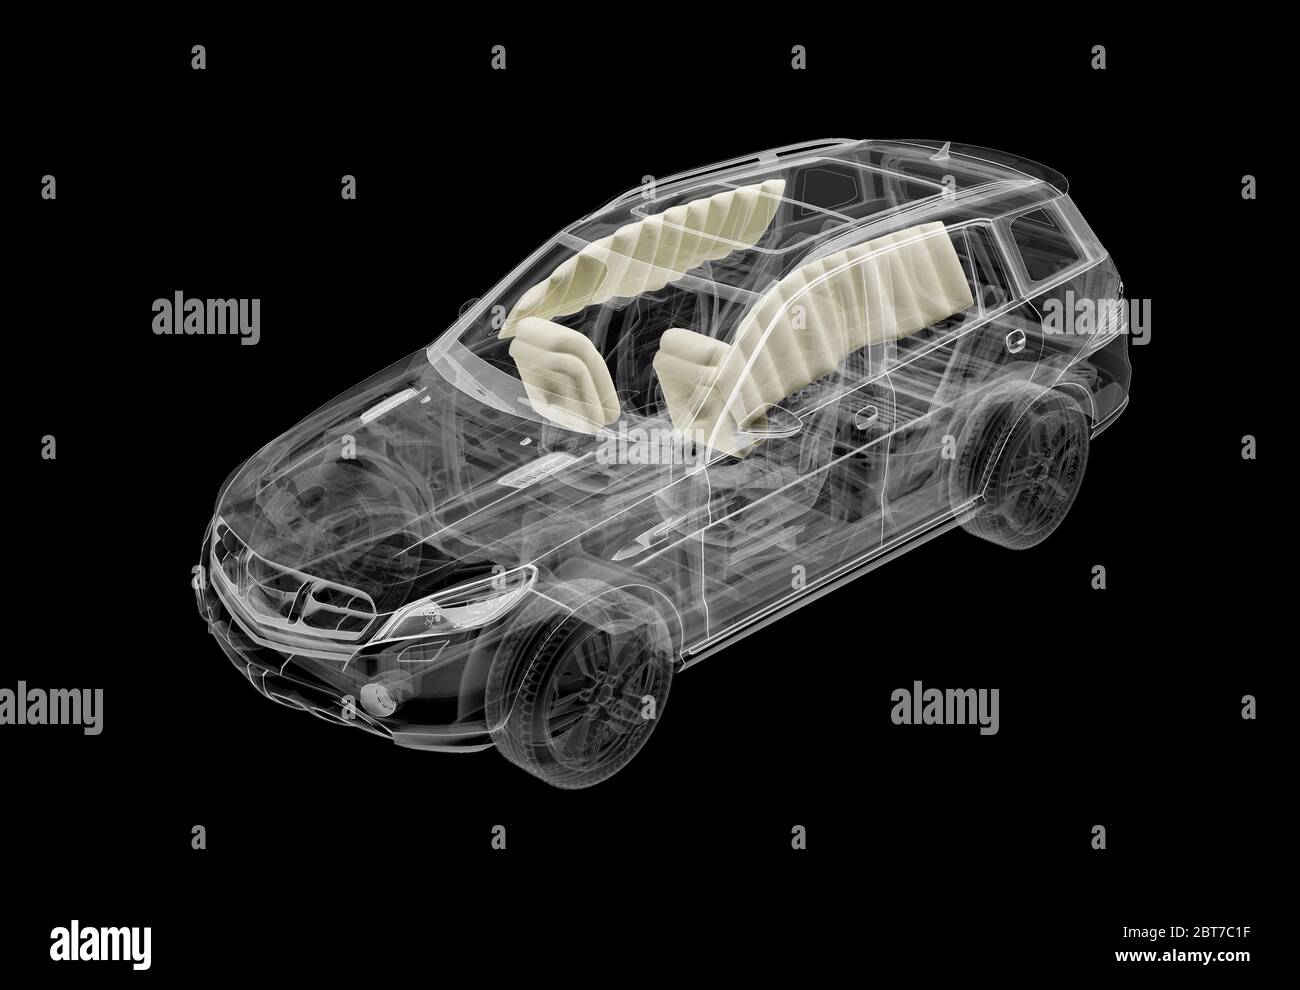 Technical 3d illustration of SUV car with x-ray effect and airbags system. Perspective view on black background. Stock Photo